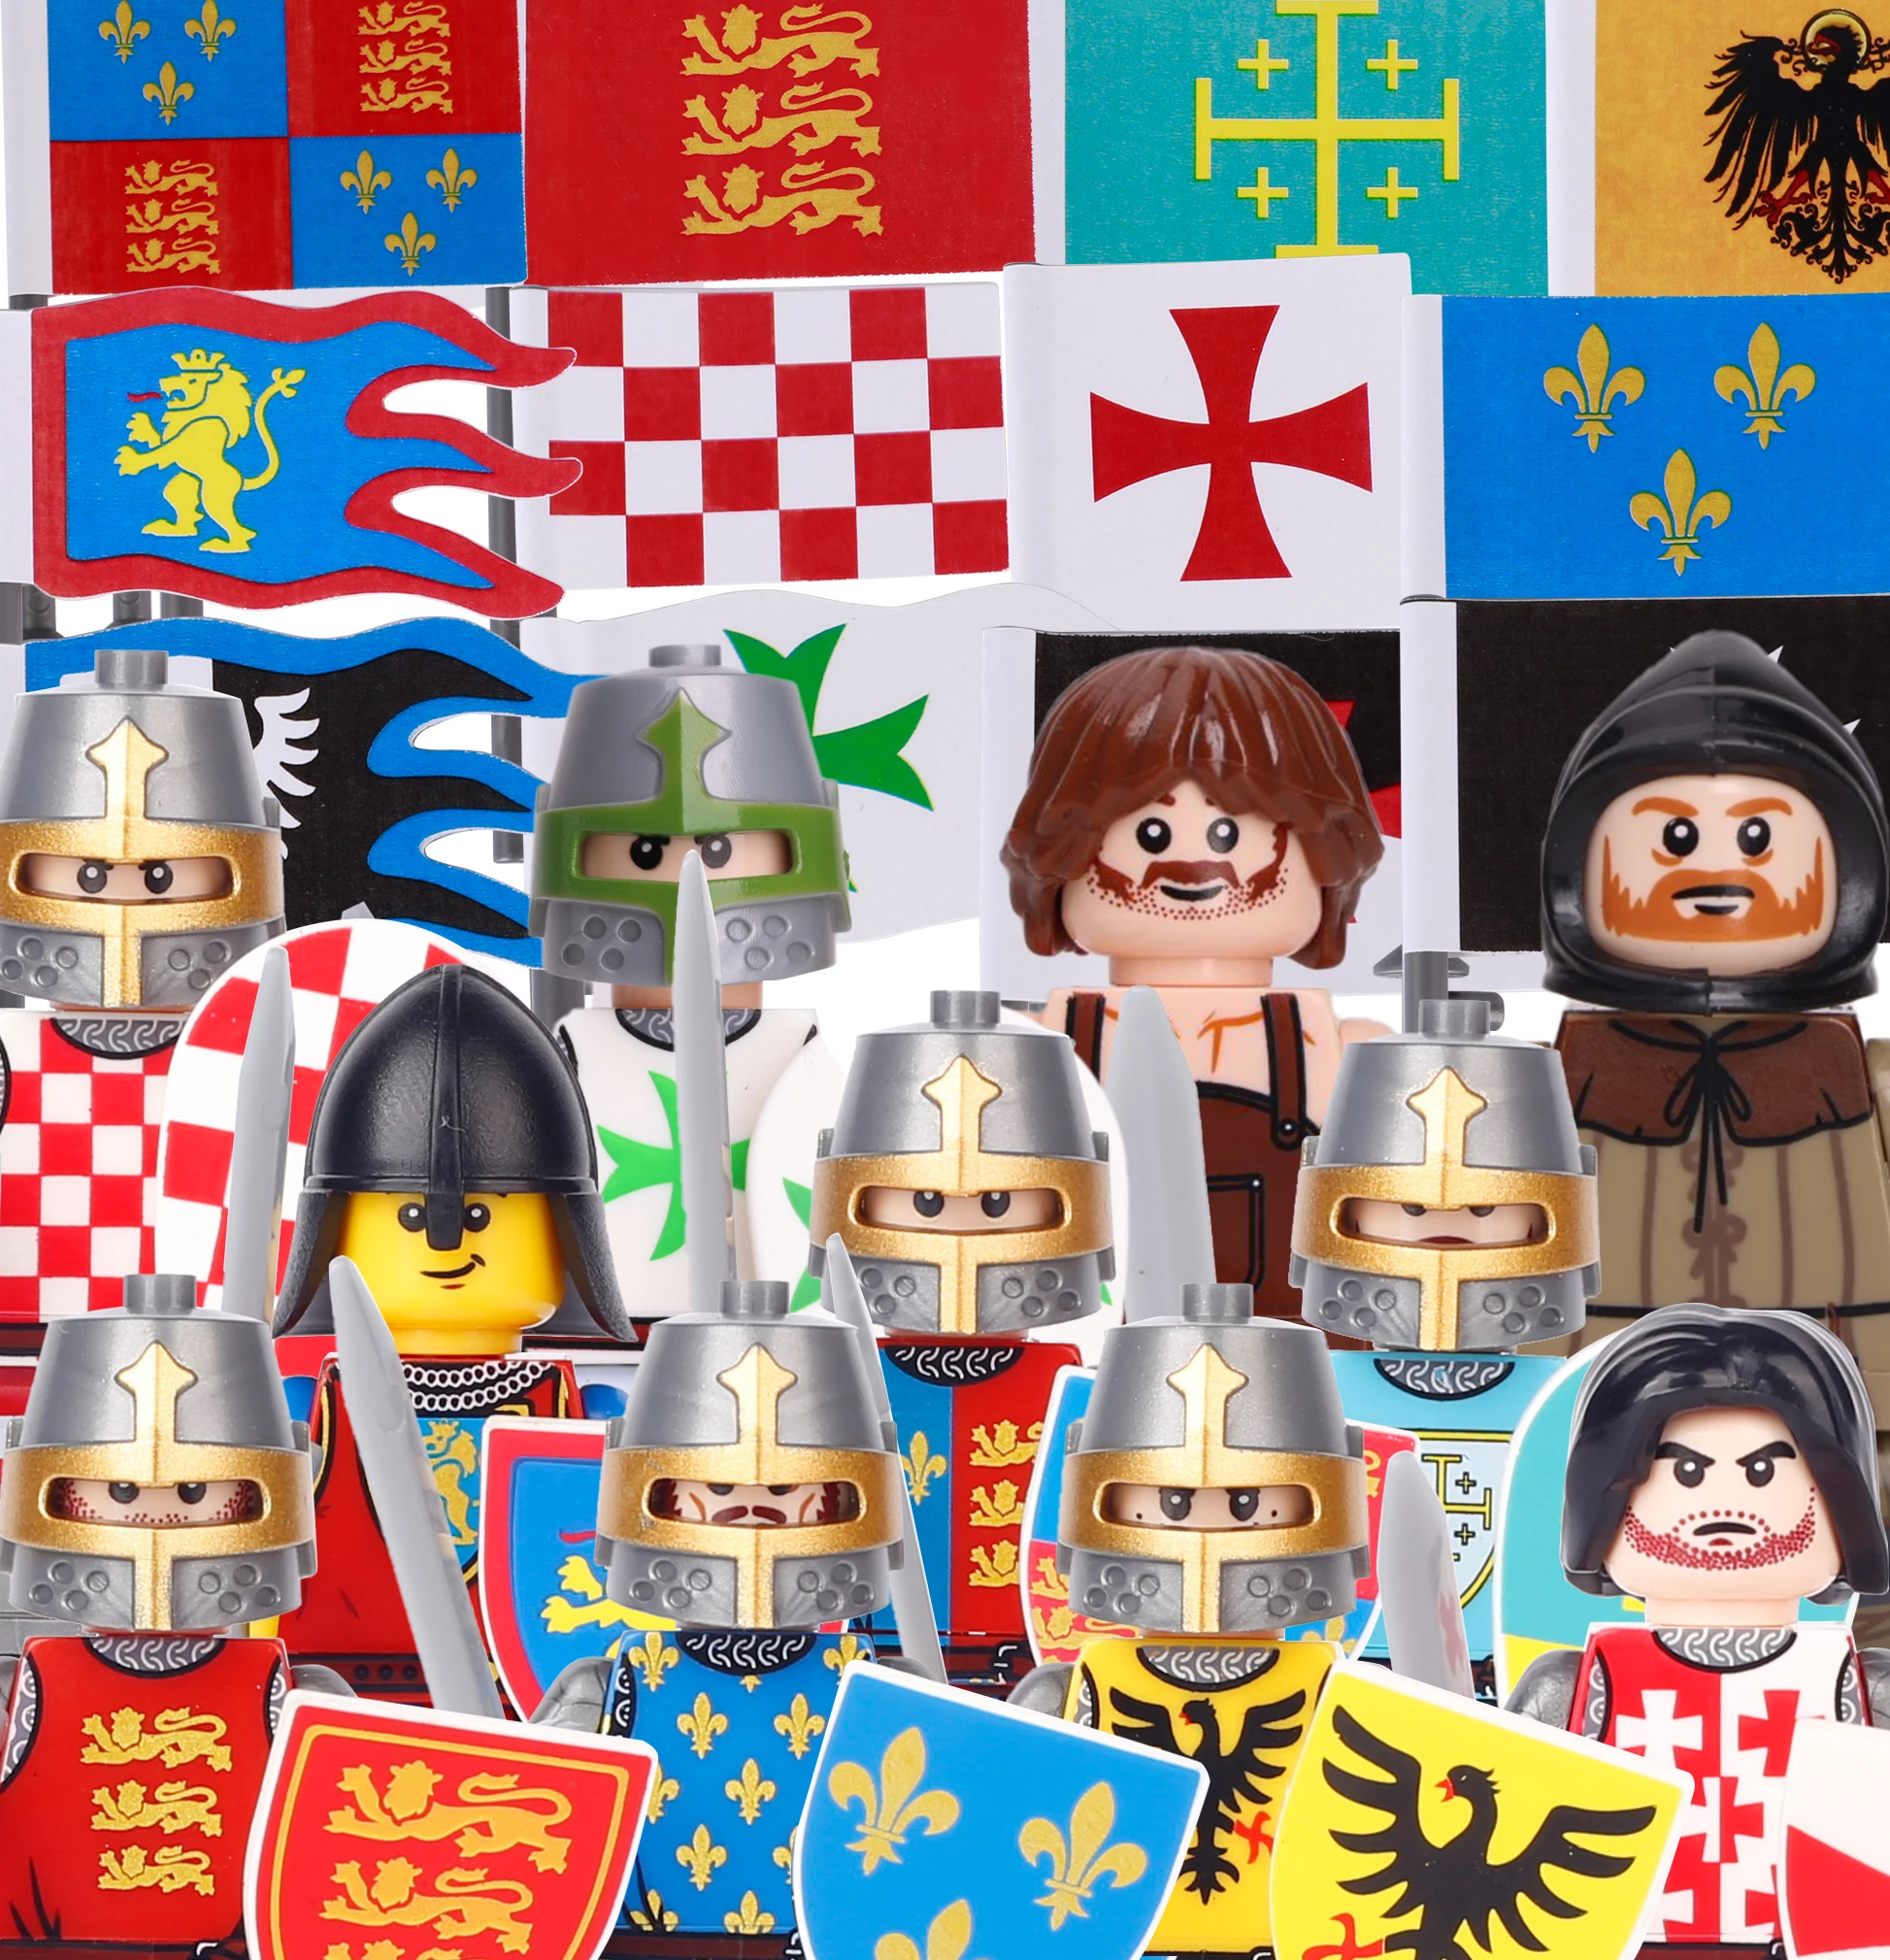 

MOC Medieval Military Castle Knights Soldiers Building Blocks Middle Age War Scene Rome Army Shield Helmet Weapons Bricks Toys